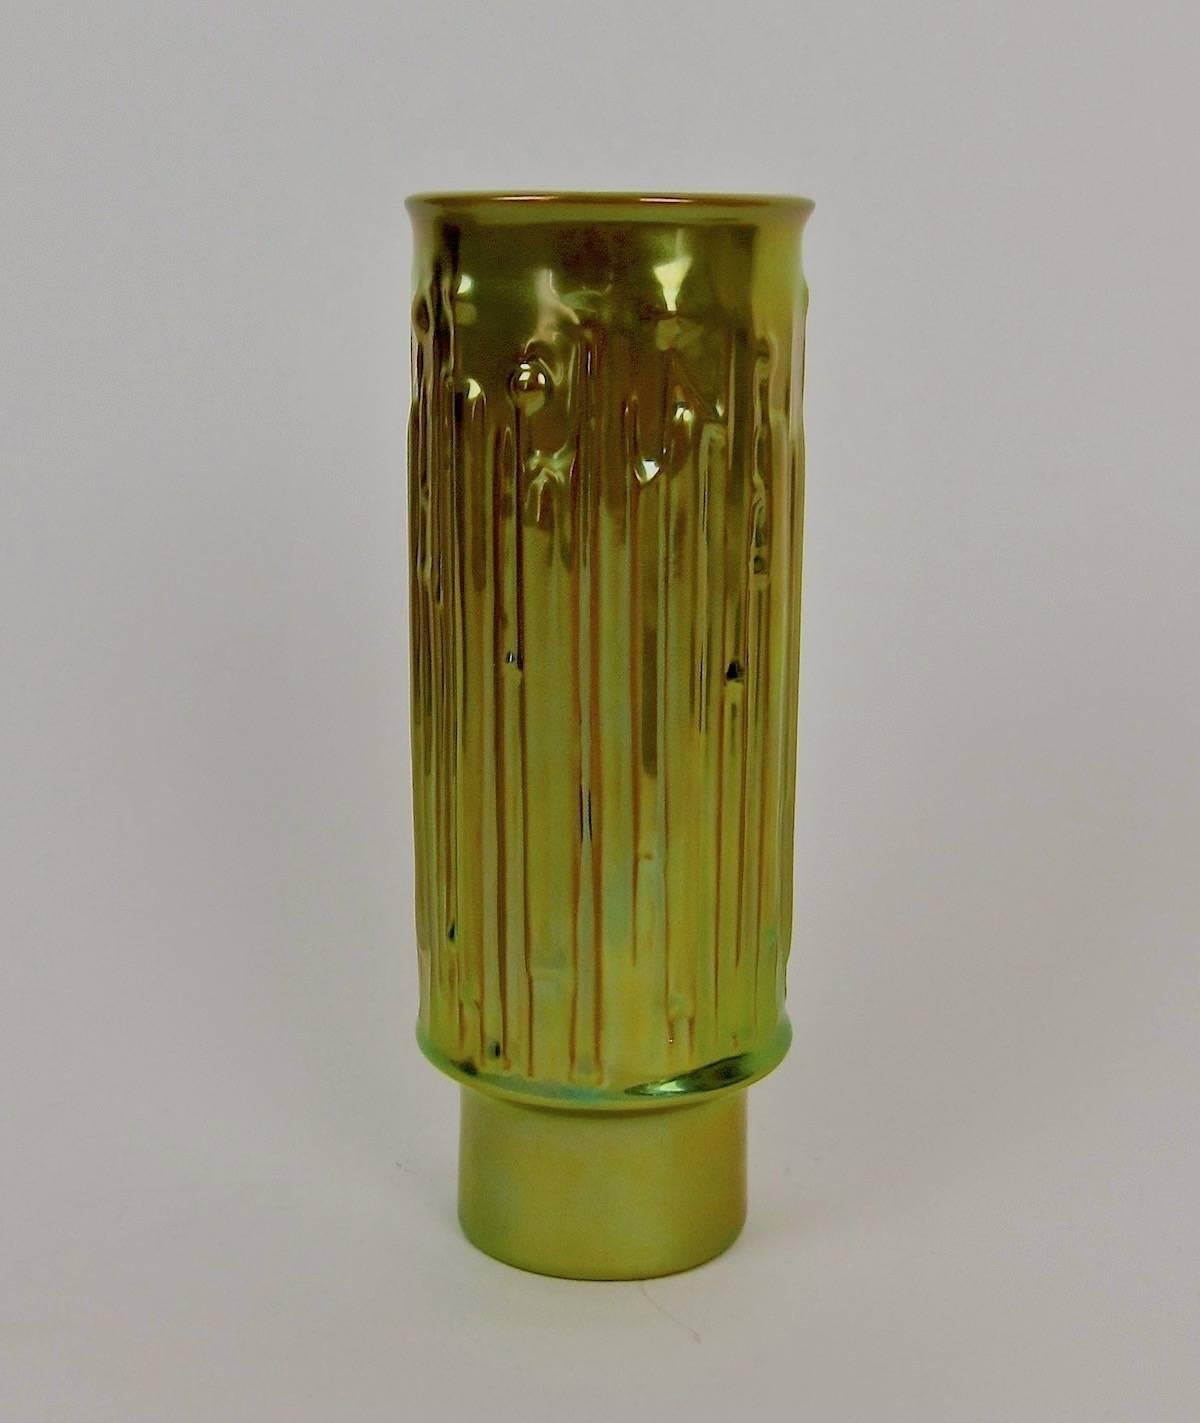 A striking cylindrical art pottery vase from the Zsolnay Pecs ceramics factory of Hungary, The Modernist design is enveloped in the firm's signature metallic golden-green 'eosin' glaze. Very good, undamaged condition measuring 8.5 in

During the